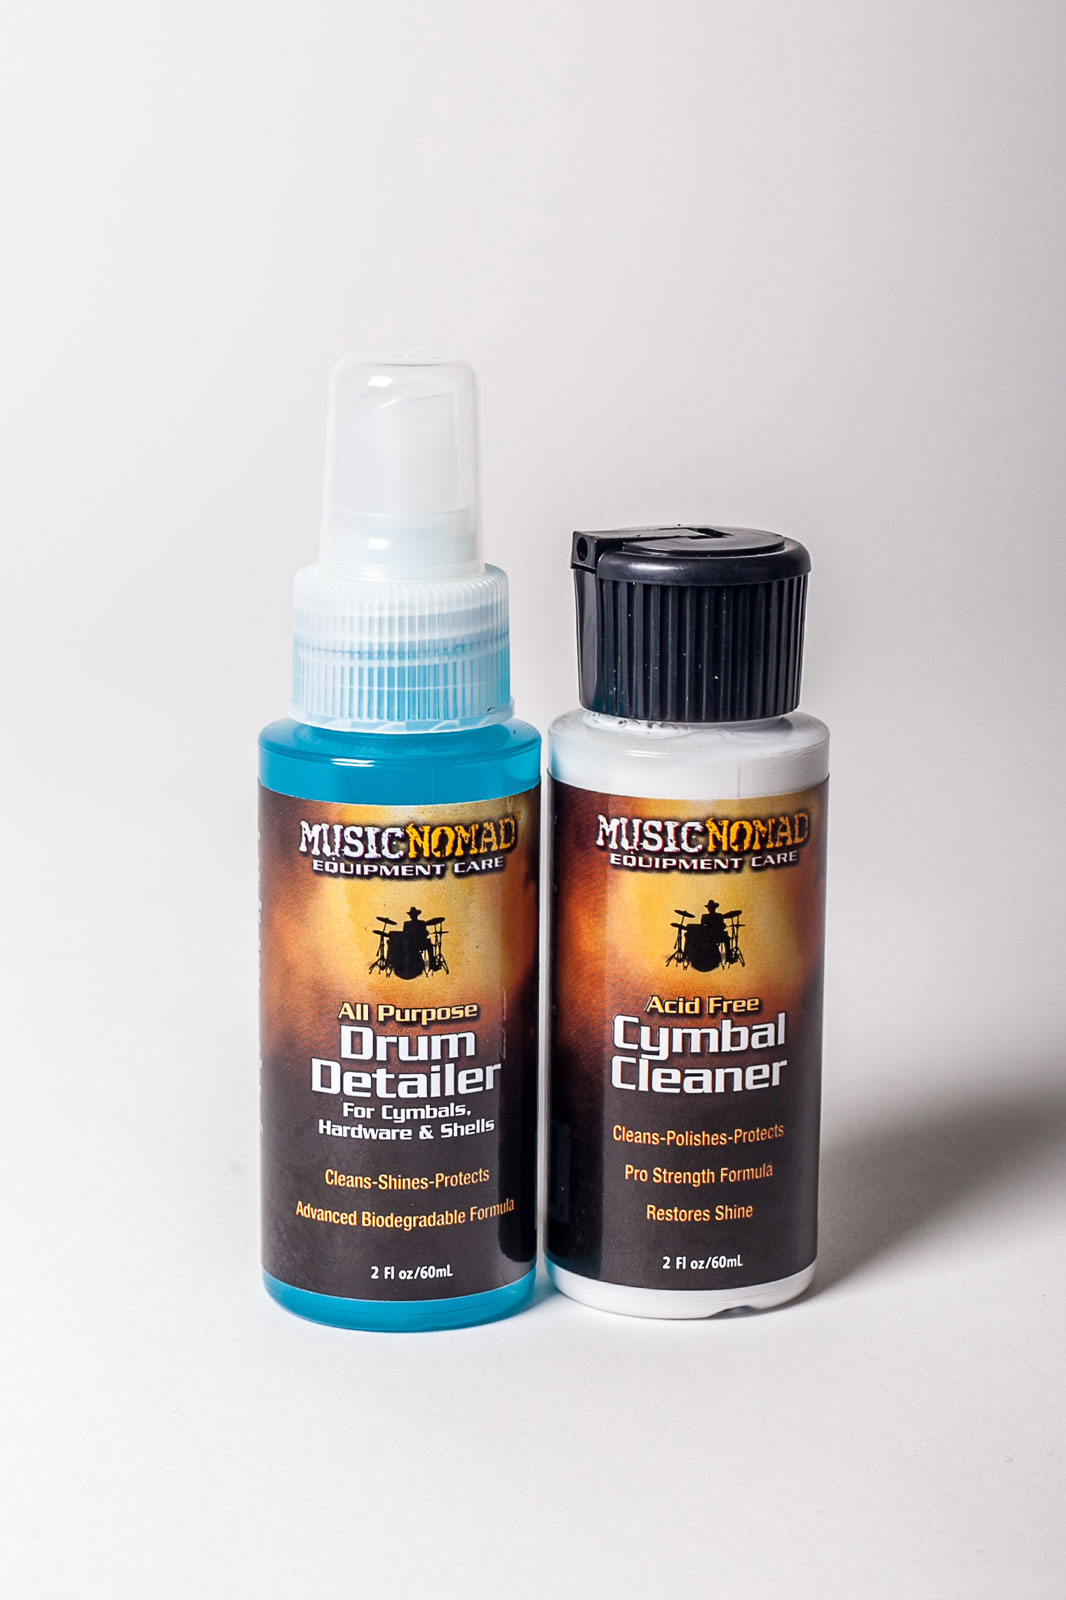 MUSICNOMAD MN117 DRUM DETAILER & CYMBAL CLEANER